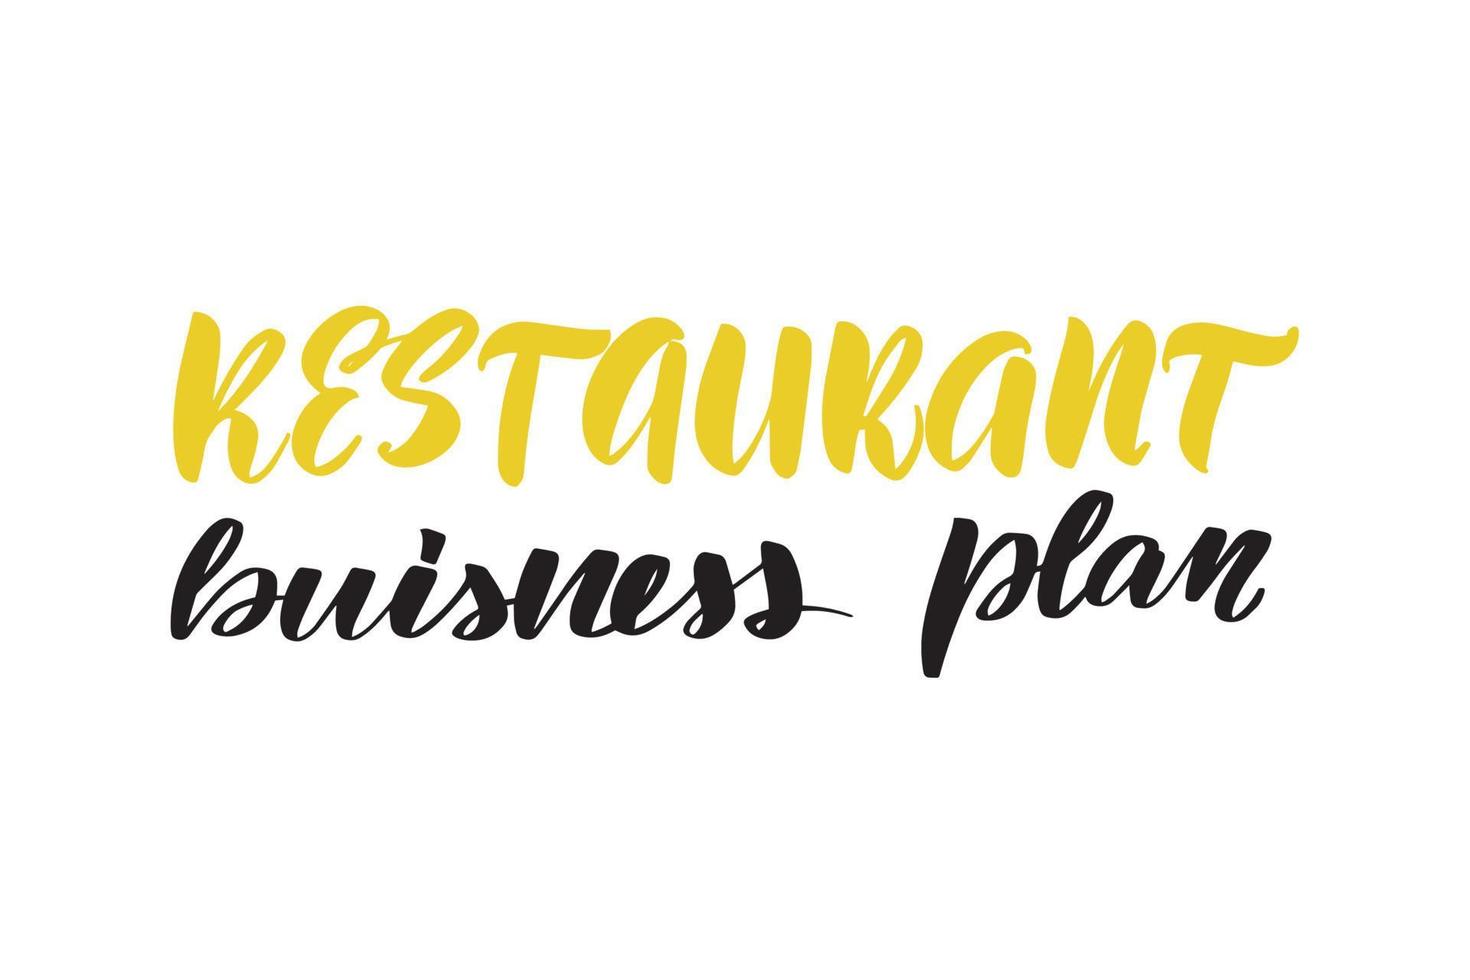 Inspirational handwritten brush lettering restaurant business plan. Vector calligraphy stock illustration isolated on white background. Typography for banners, badges, postcard, tshirt, prints